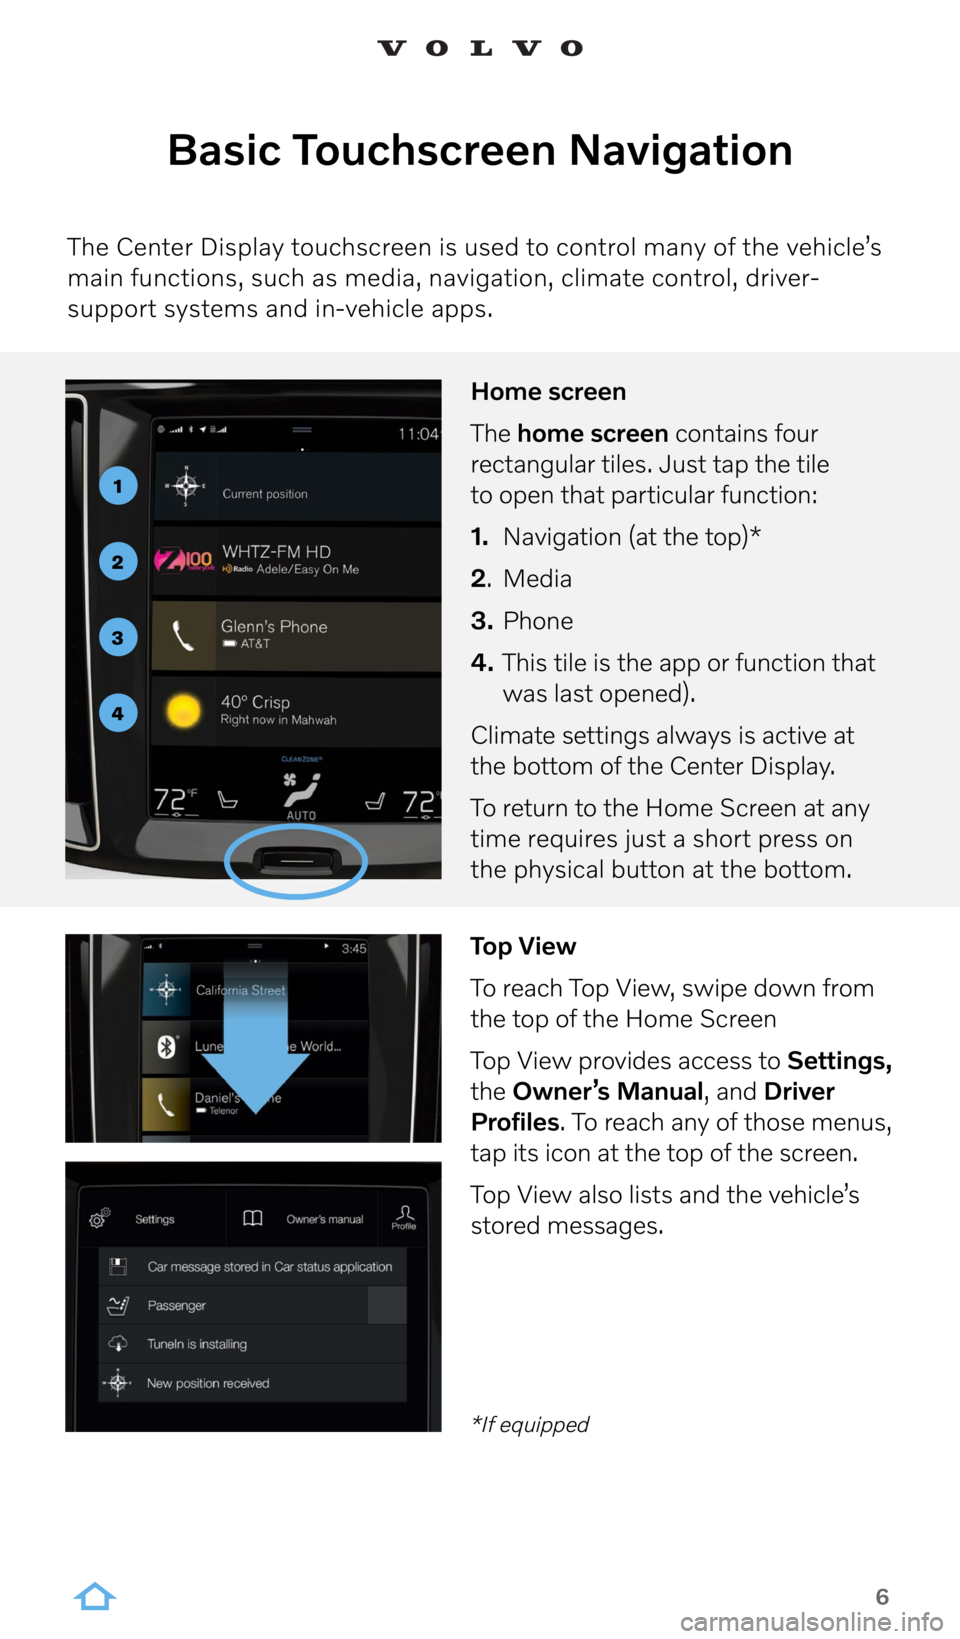 VOLVO S60 2022  Sensus Digital Guide 6
Basic Touchscreen Navigation
The Center Display touchscreen is used to control many of the vehicle’s 
main functions, such as media, navigation, climate control, driver-
support systems and in-veh